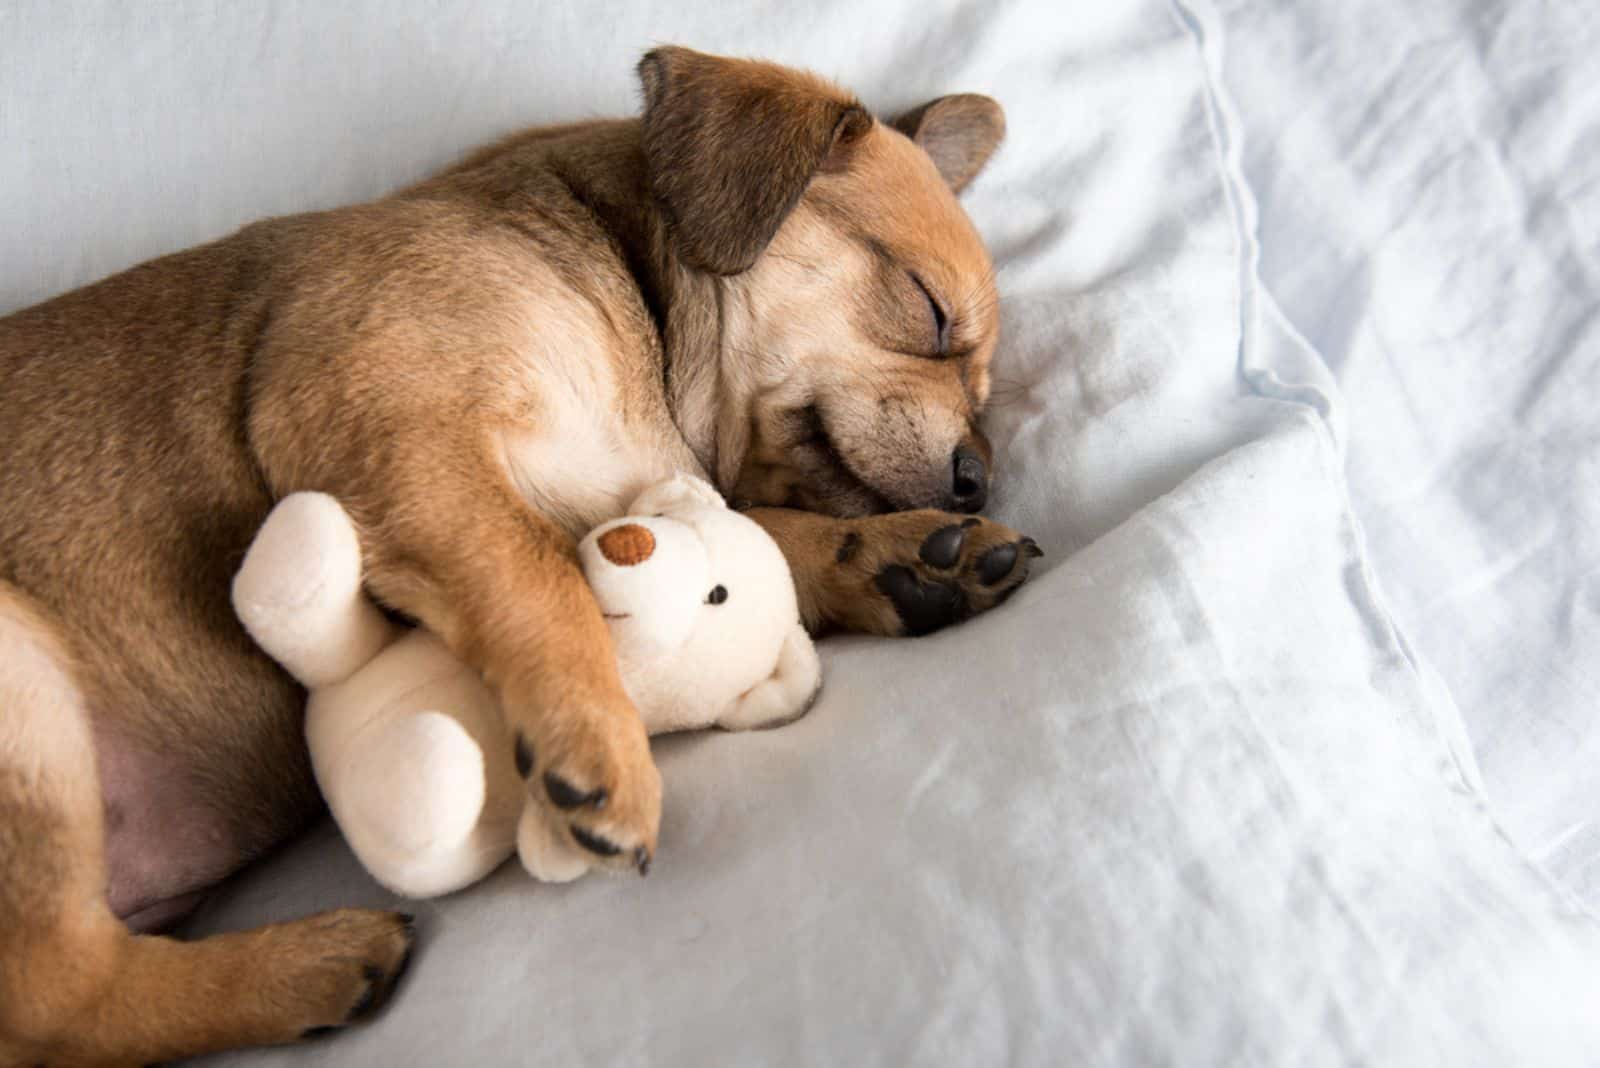 One Month Old Terrier Mix Puppy Sleeping in Bed with Favorite Toy